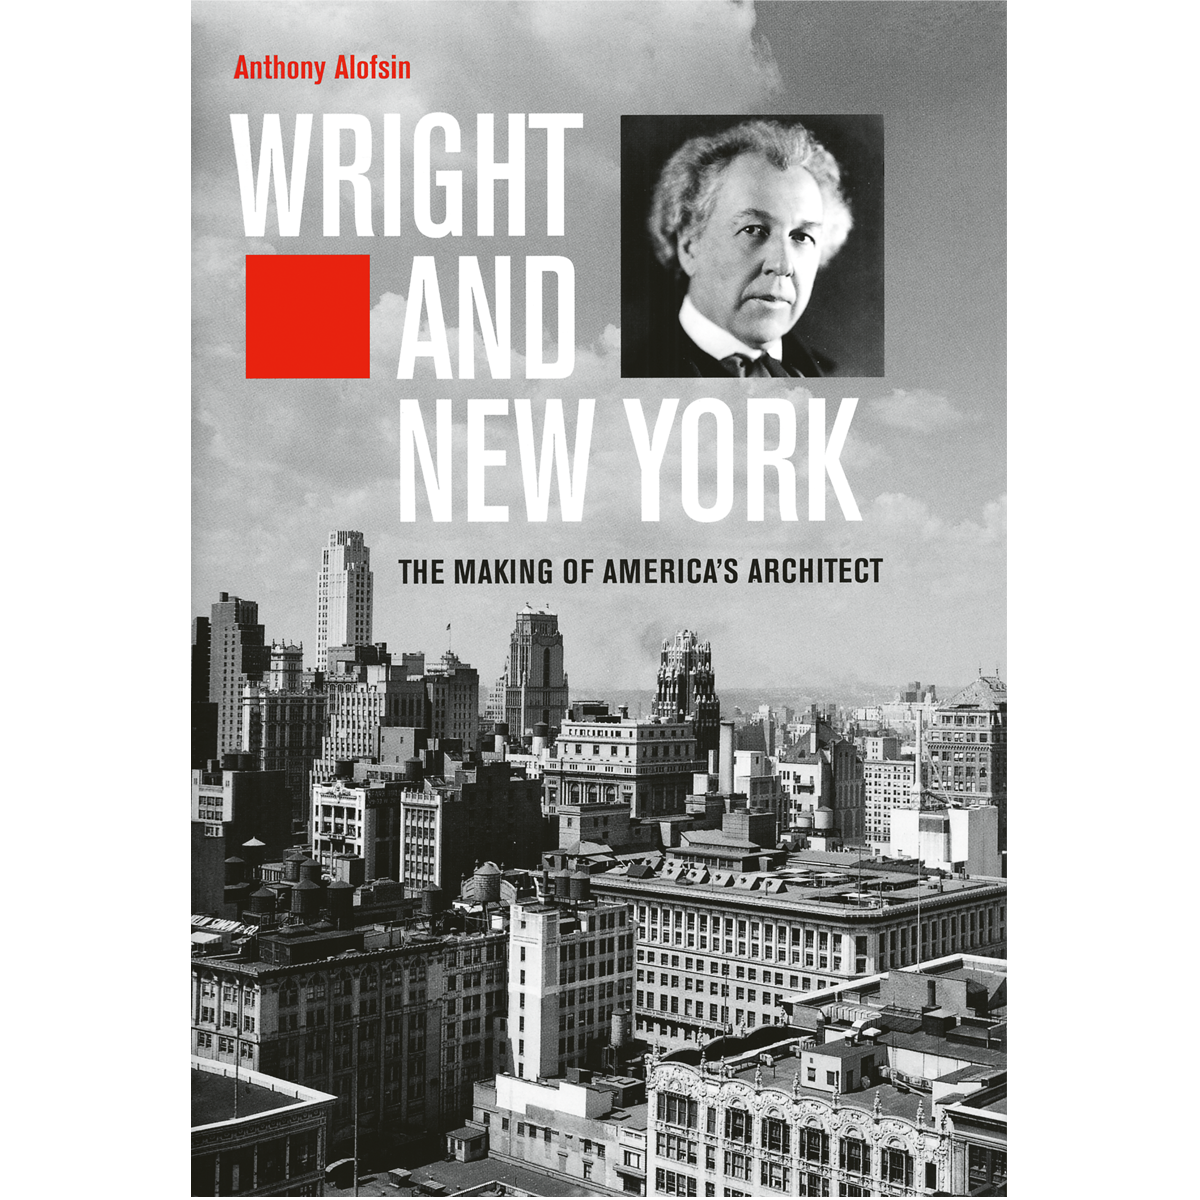 Wright and New York